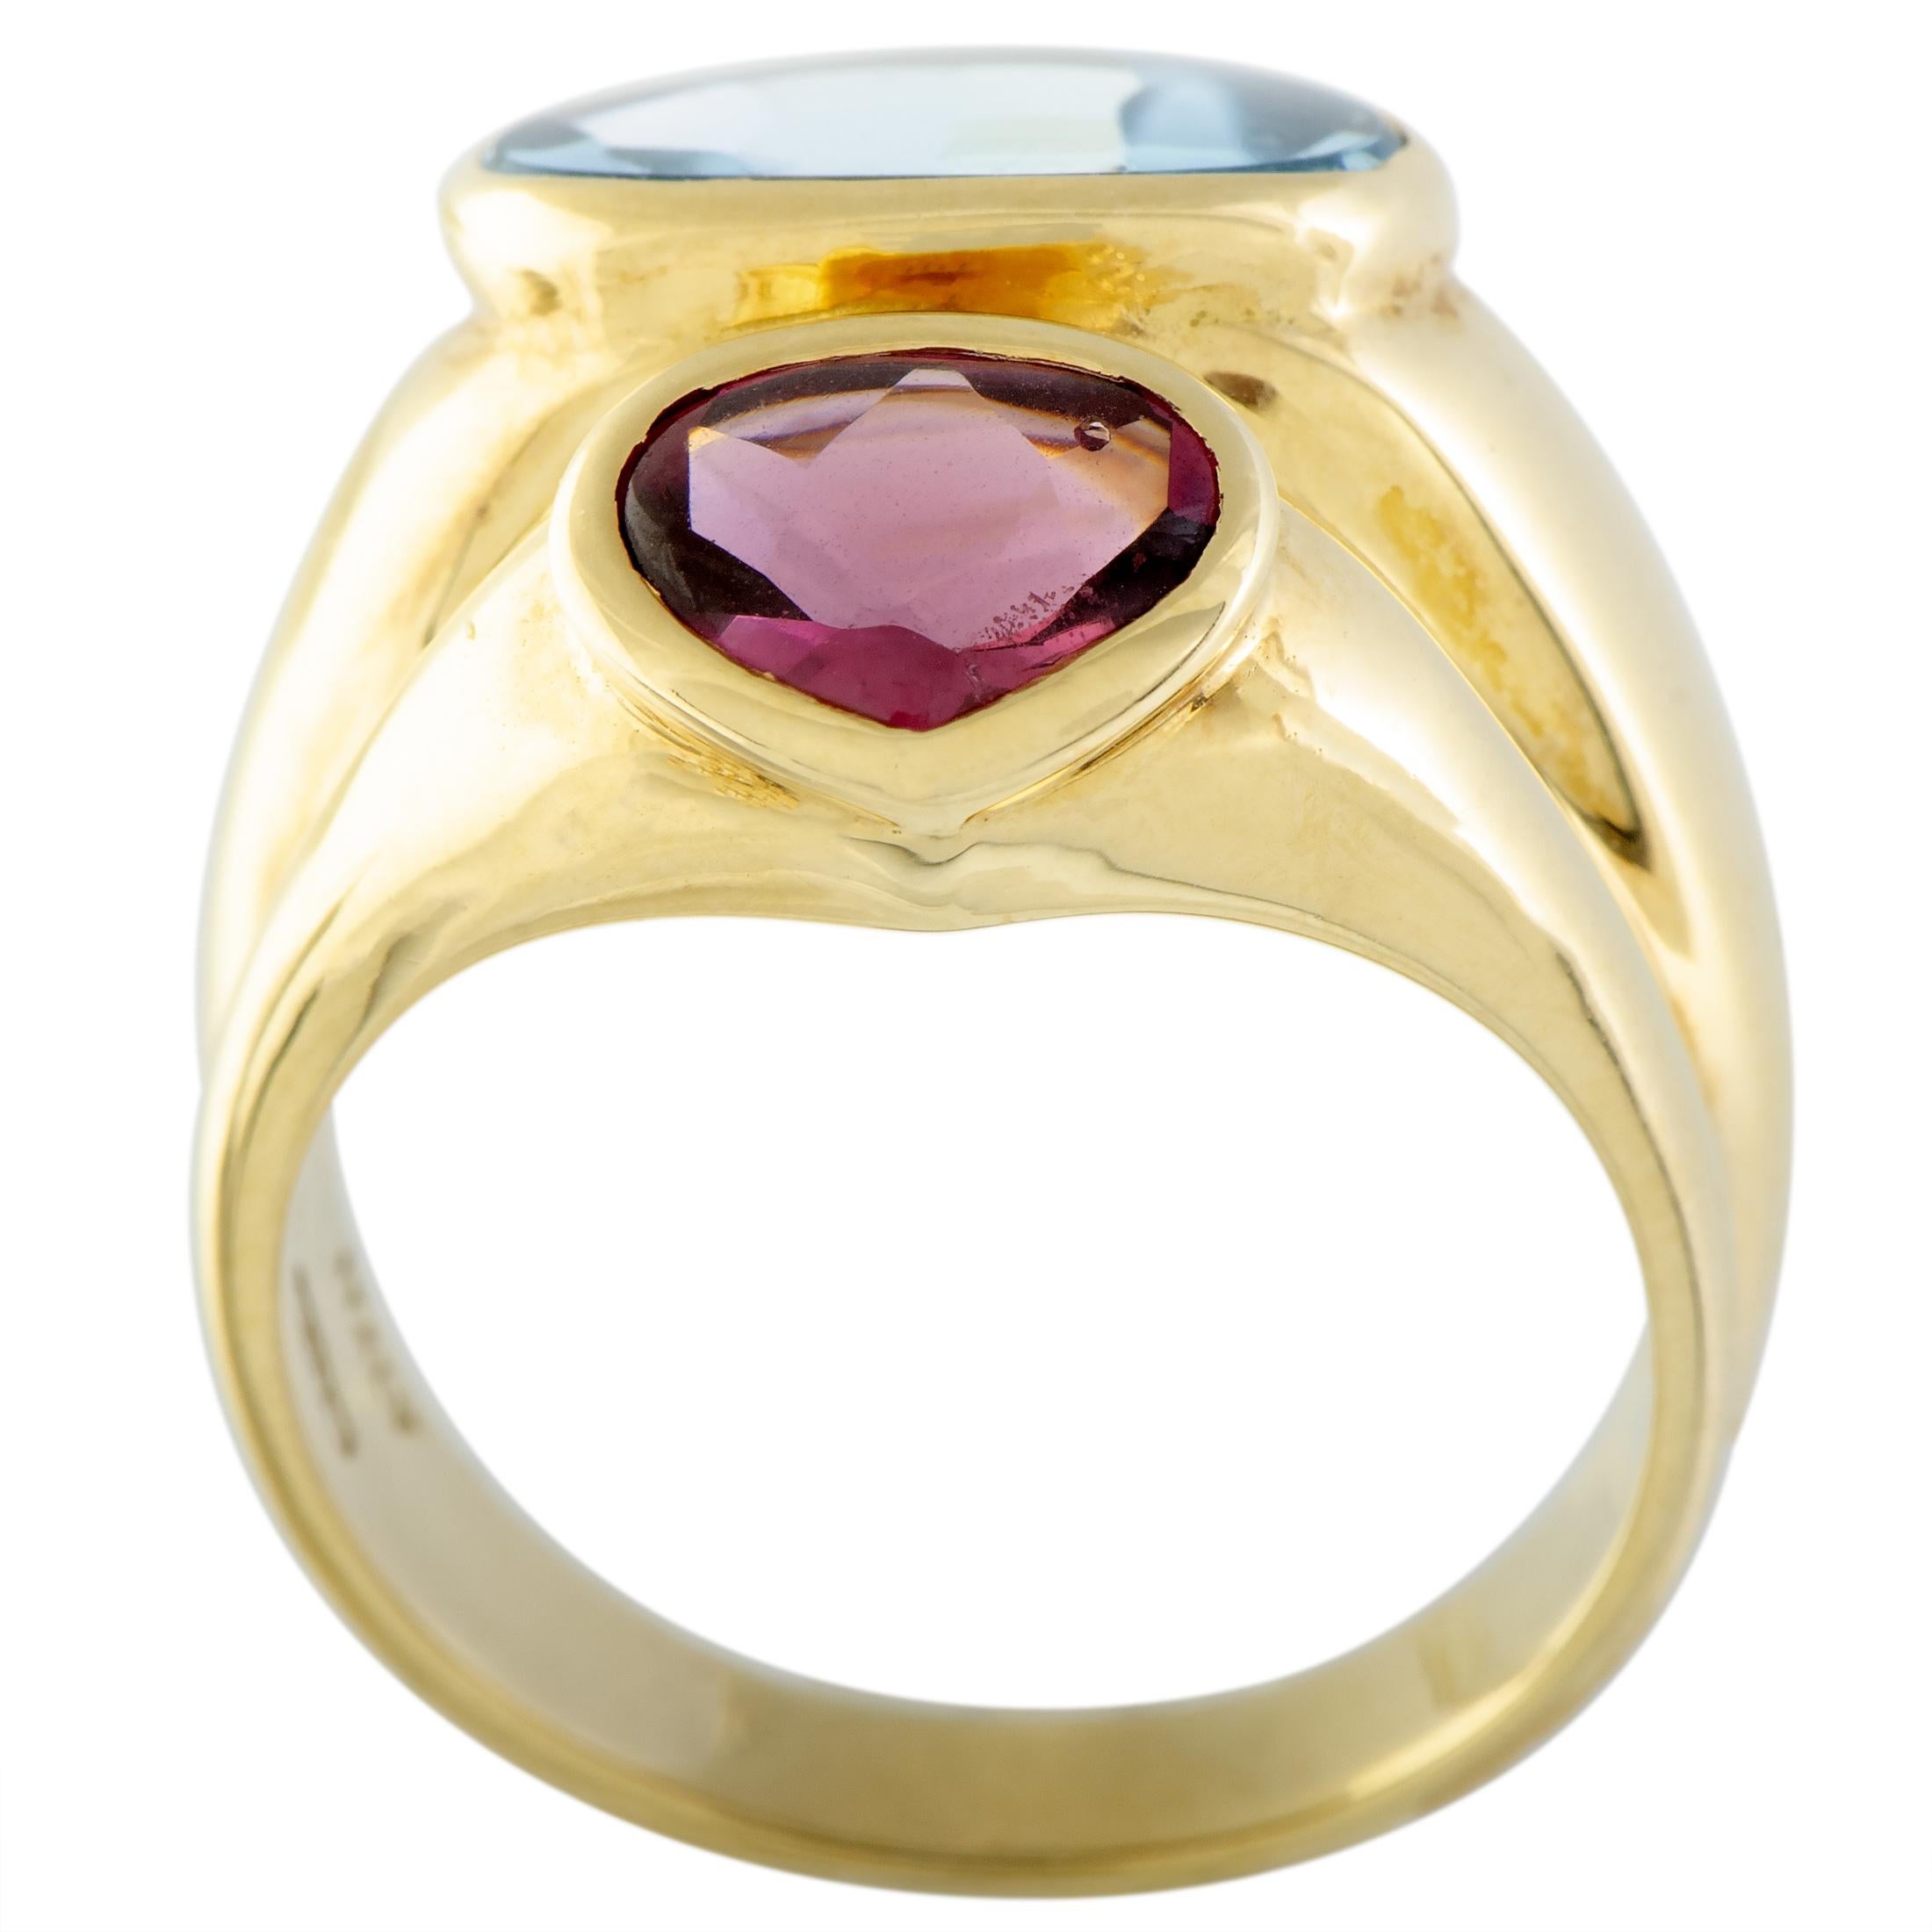 Tastefully contrasting, vividly colorful, and charmingly alluring, the splendid topaz and fabulous pink tourmaline are intriguingly shaped and expertly set against the unblemished exuberance of 18K yellow gold in this marvelous ring from